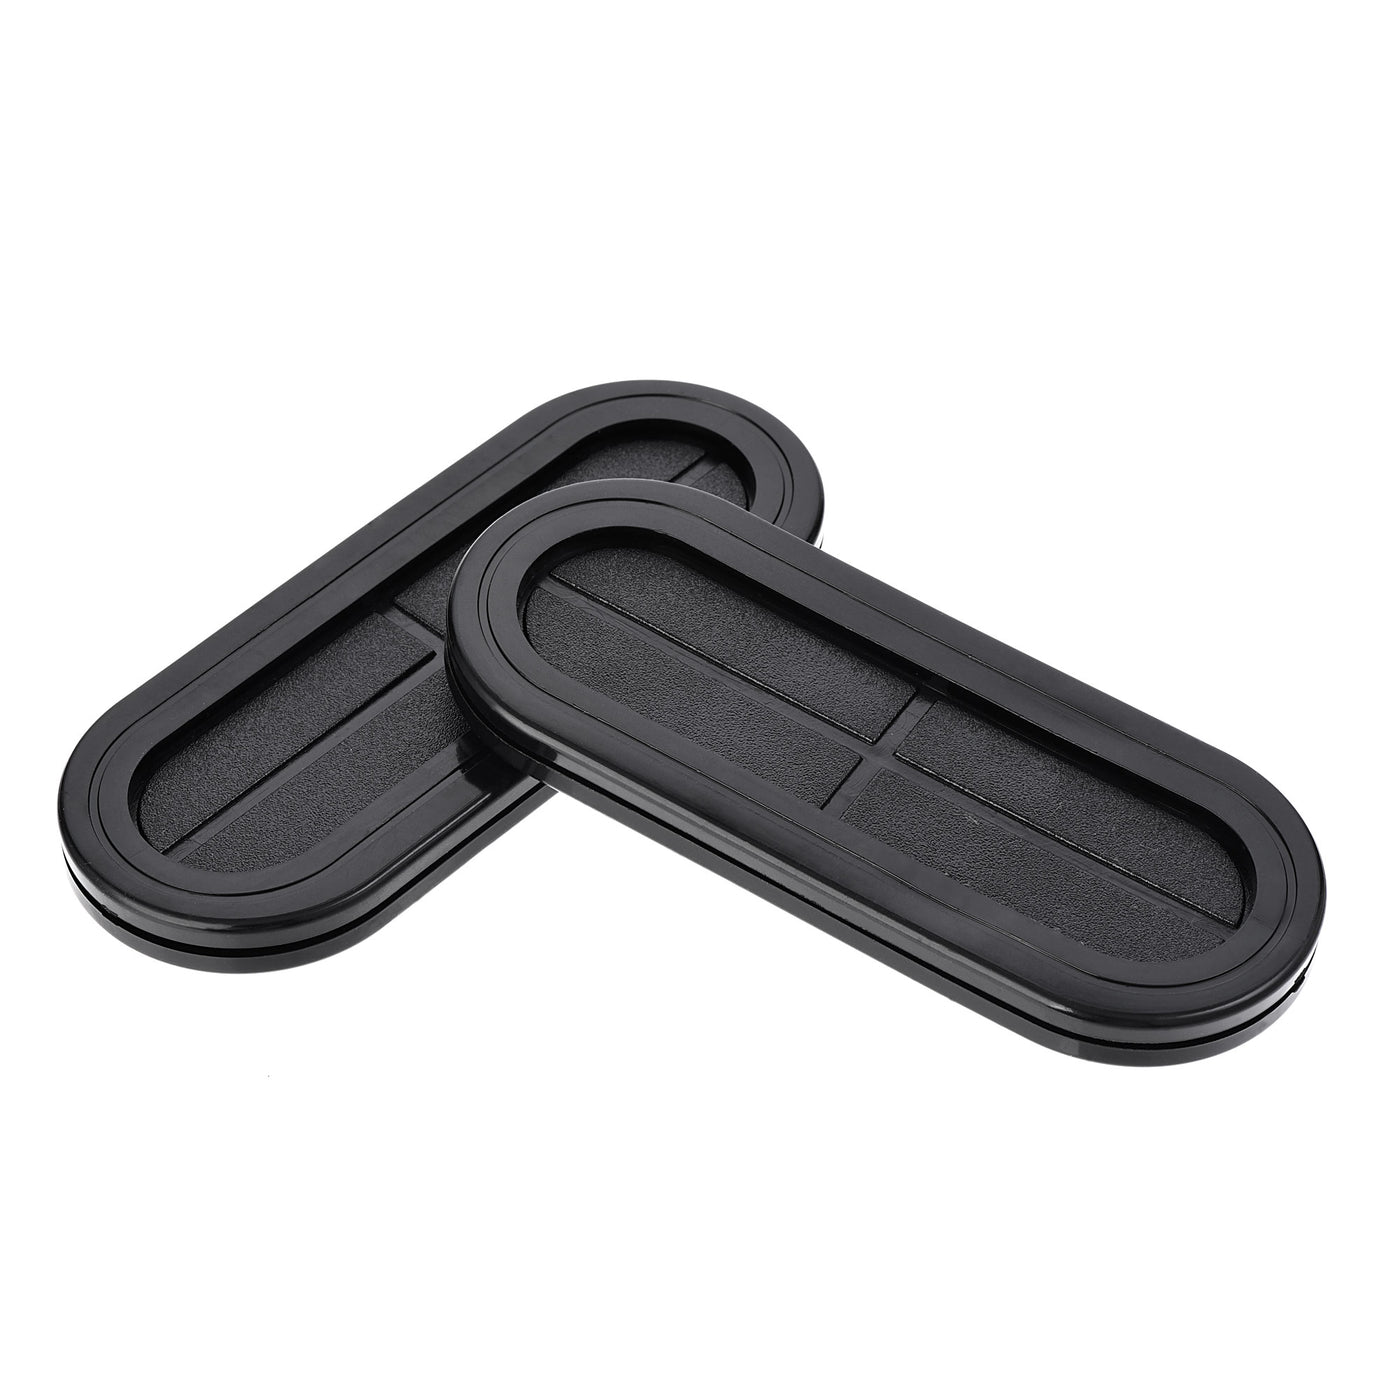 Uxcell Uxcell Rubber Grommet Oval Double-Sided Mount Size 83 x 40 mm for Wire Protection 10pcs